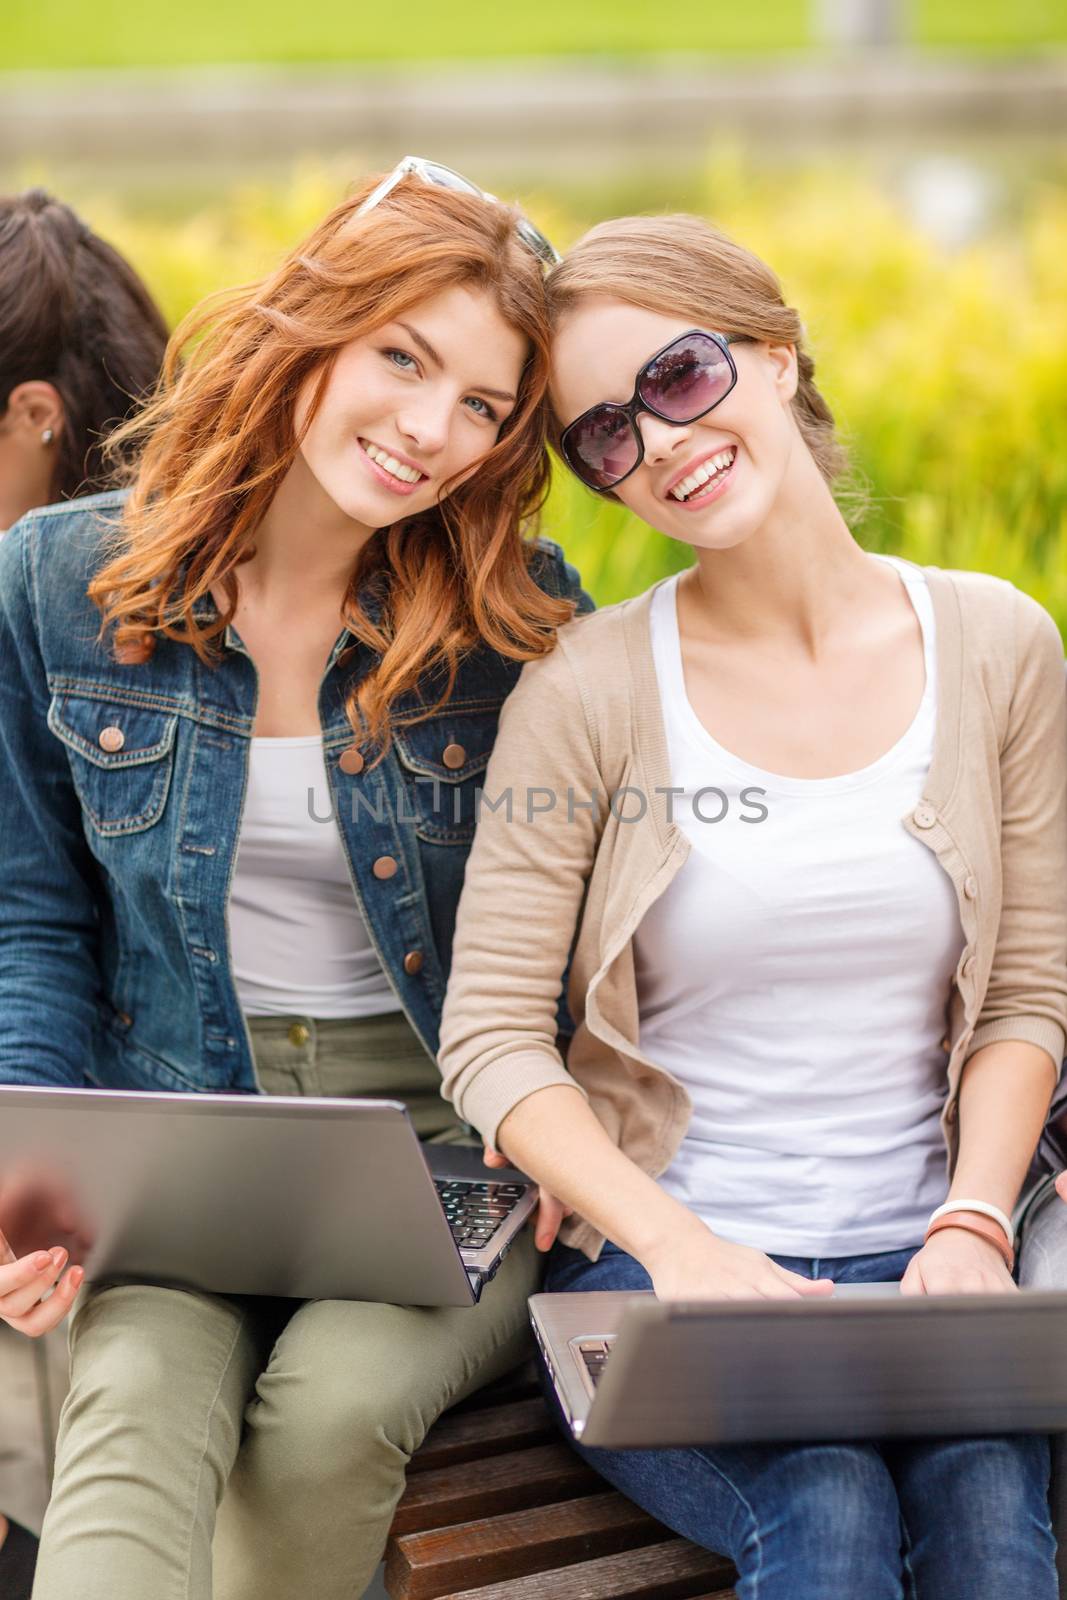 summer holidays, education, campus, technology and teenage concept - two female students with laptop computers